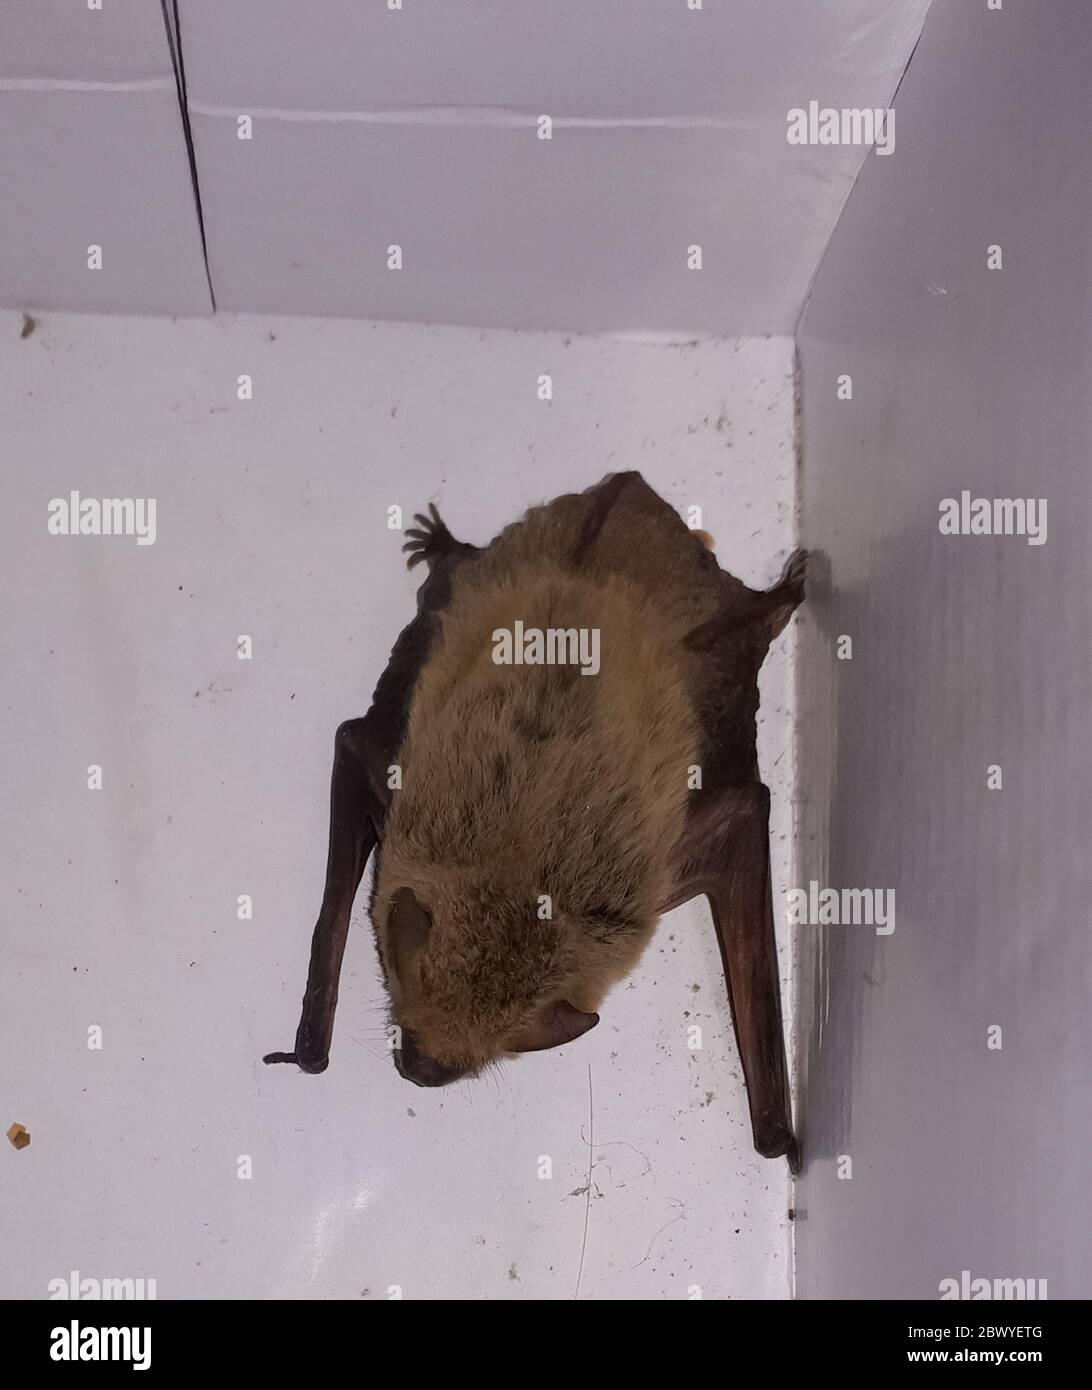 A bat is hiding in a corner of the room. Stock Photo